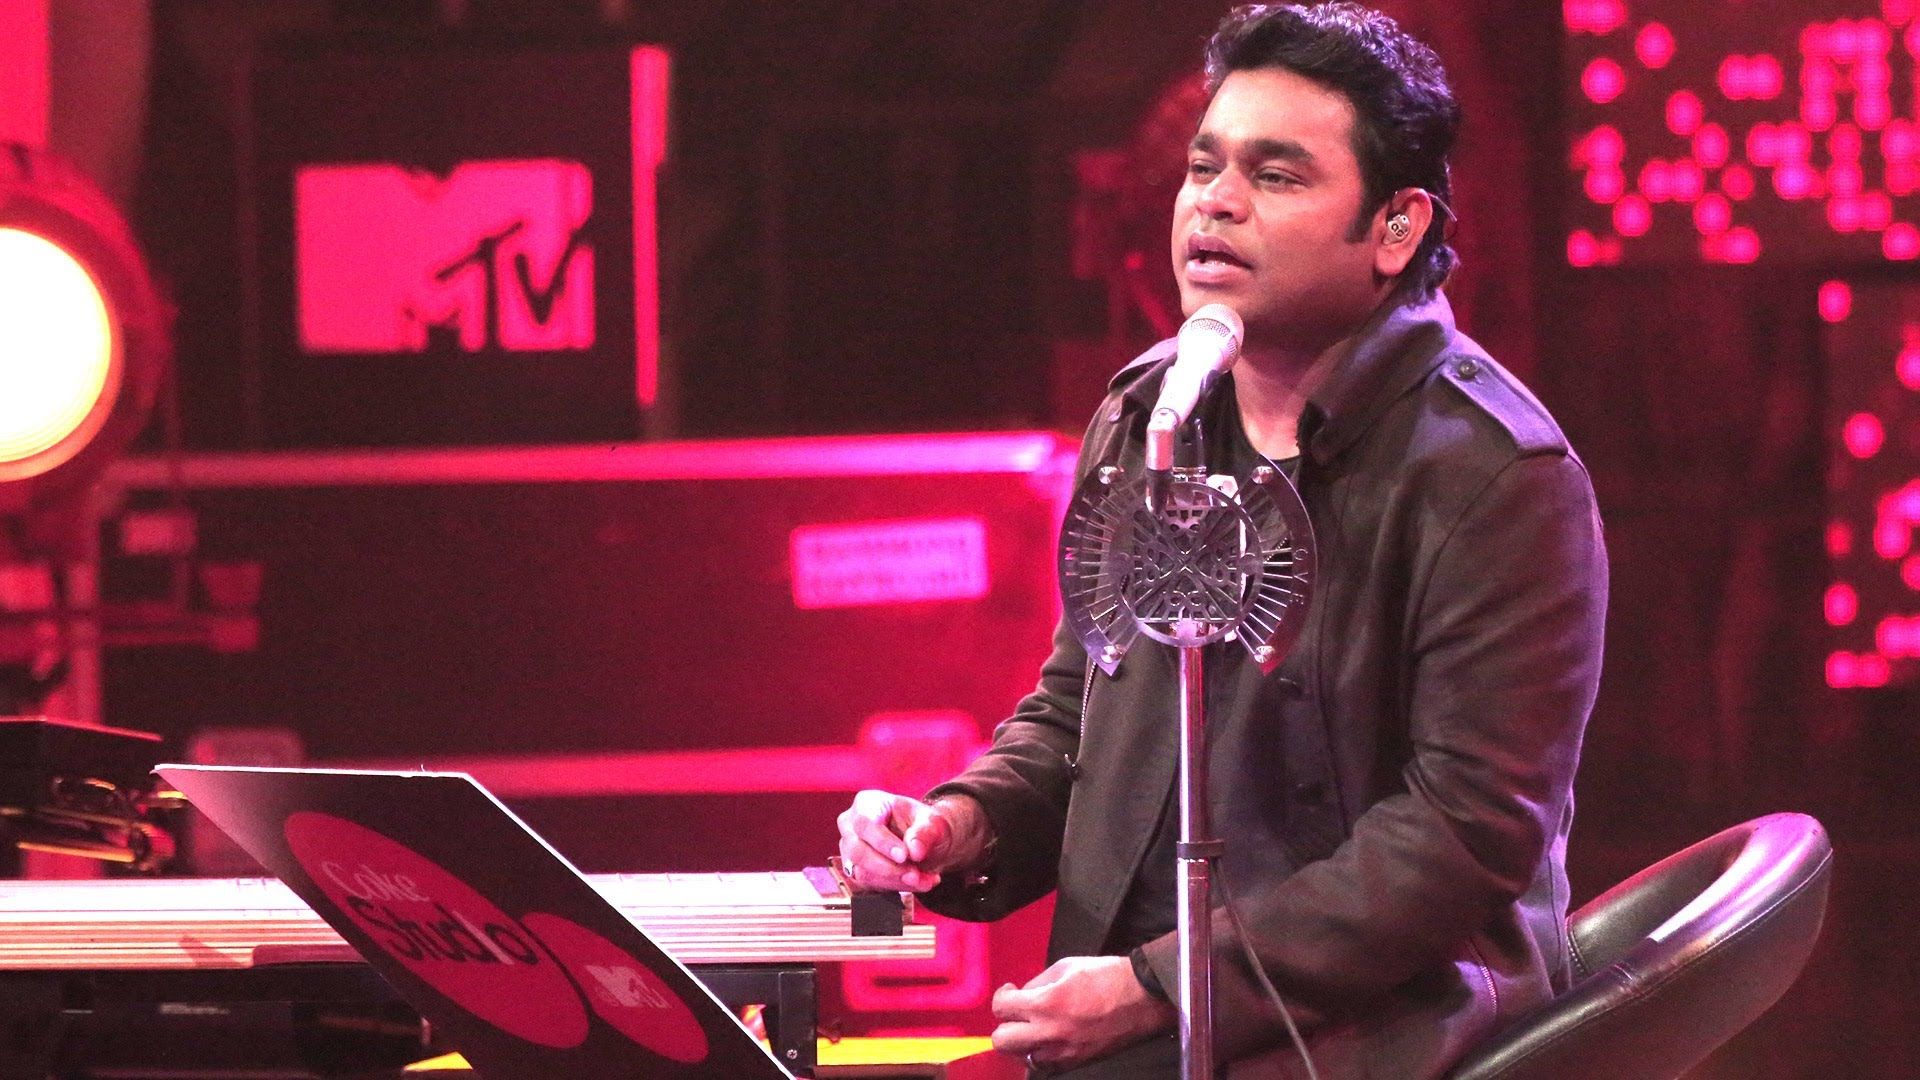 AR Rahman to perform at Expo 2020 Today. First with the news